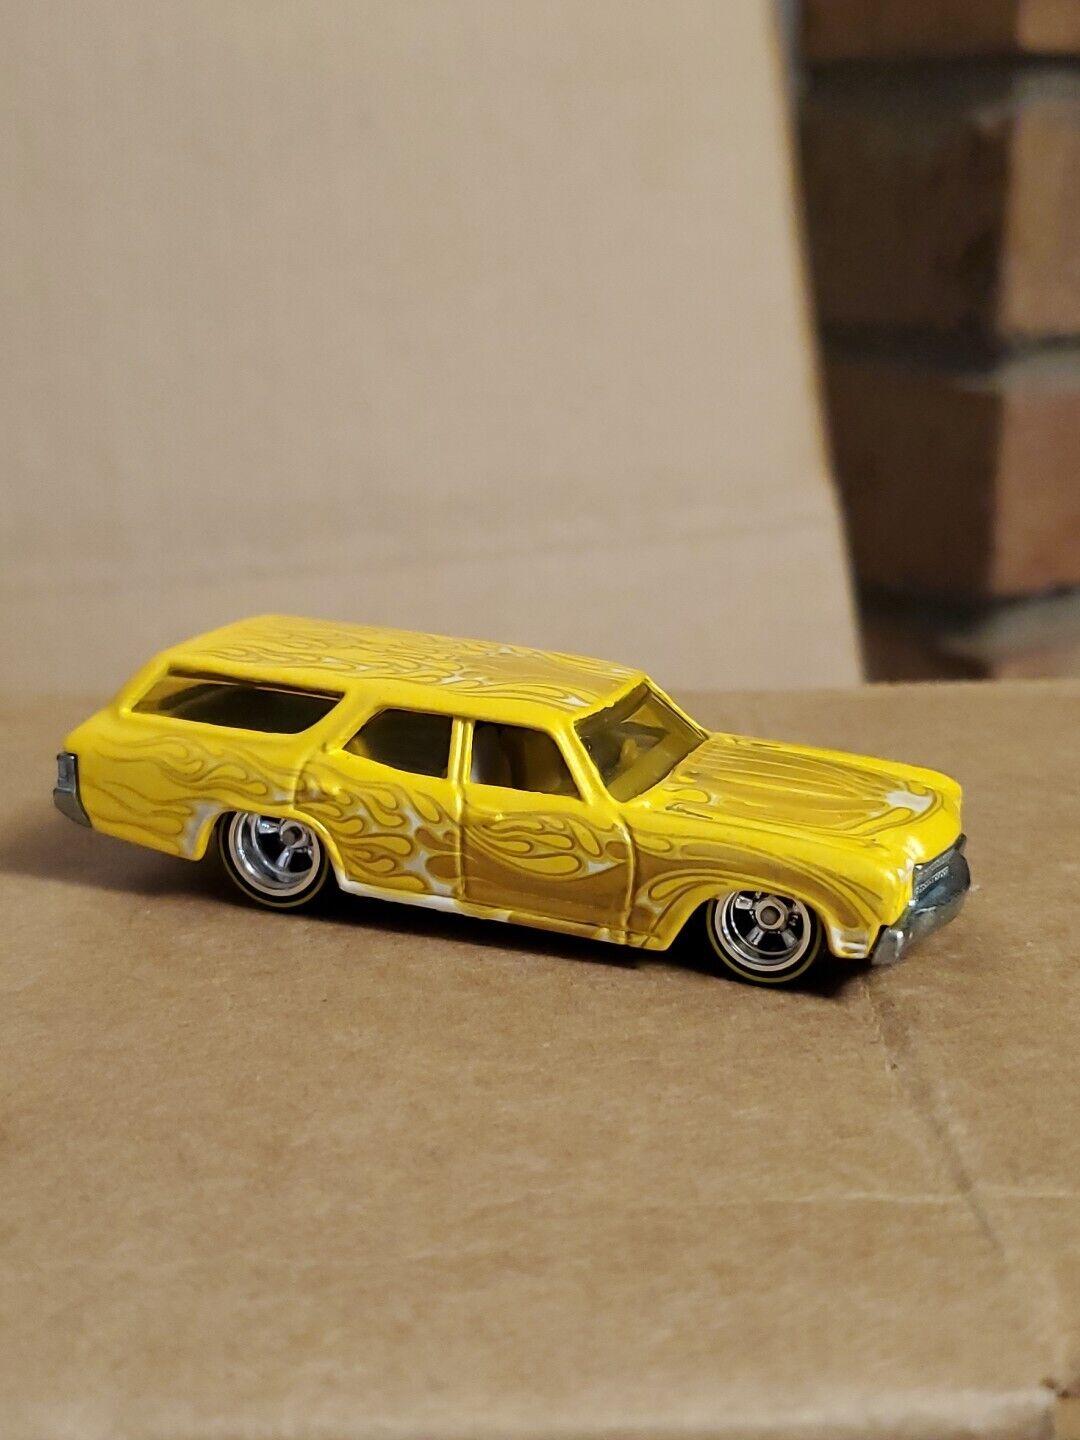 Hot Wheels Wayne's Garage '70 Chevelle SS Wagon Yellow with Real Riders